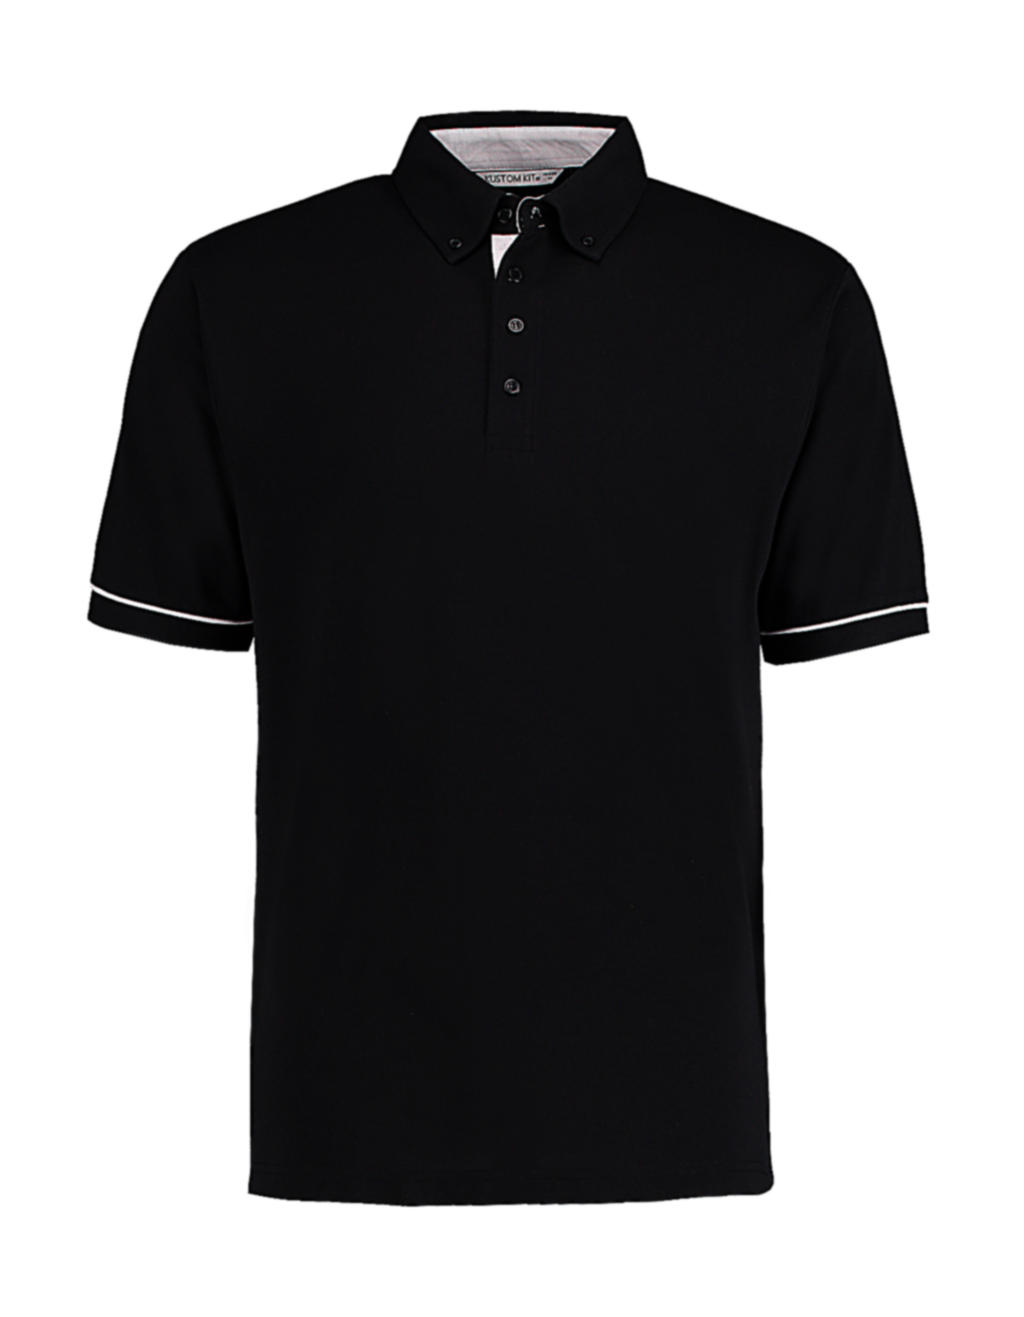  Classic Fit Button Down Contrast Polo Shirt in Farbe Black/White